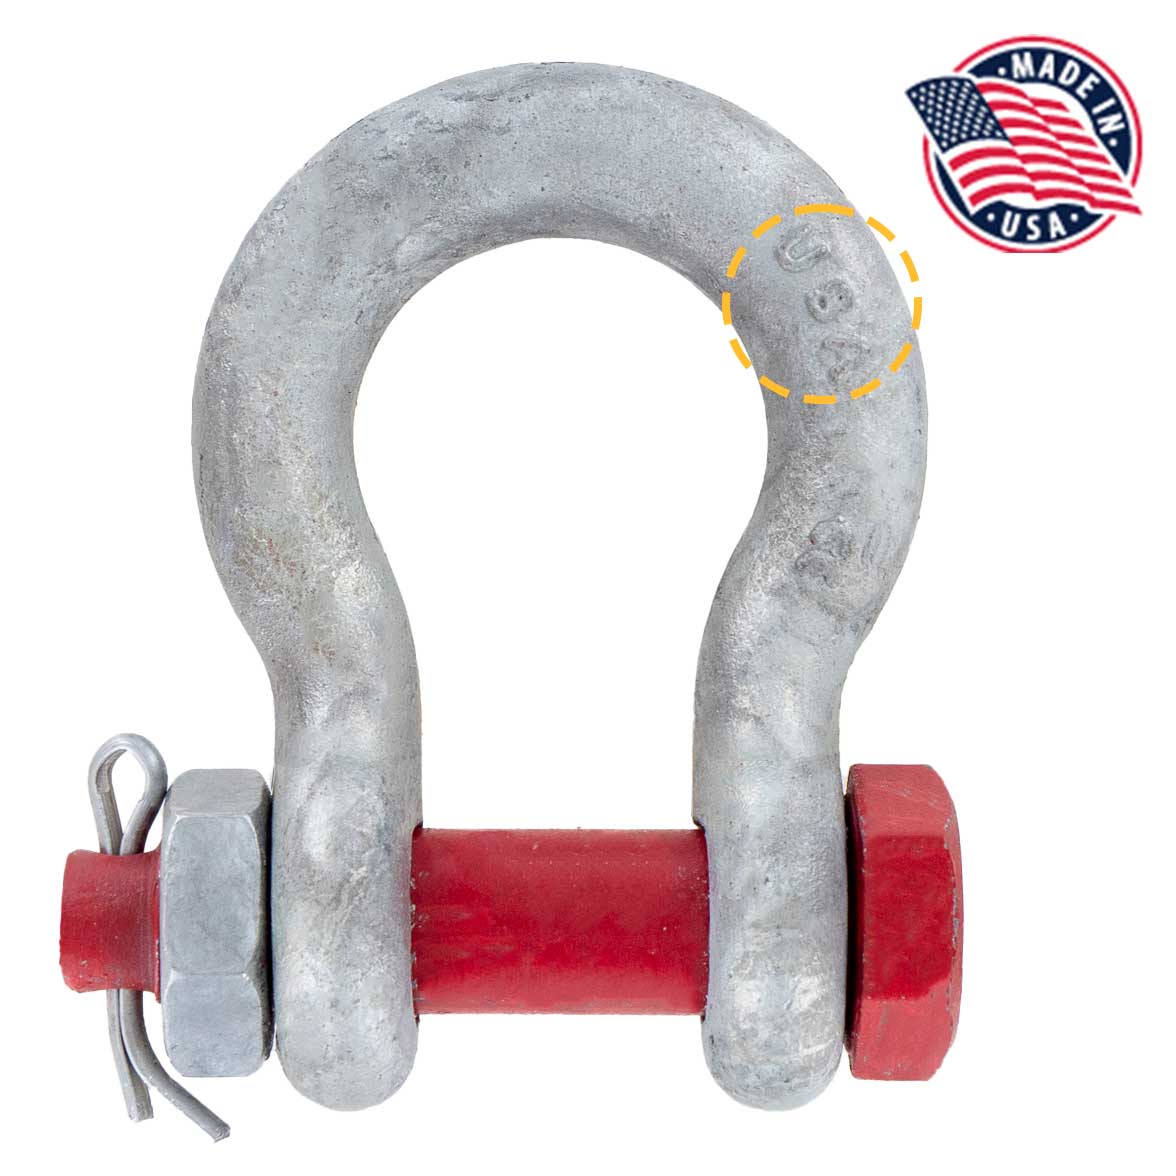 3/16" Crosby® Bolt Type Anchor Shackle | G-2130 - 0.33 Ton made in USA